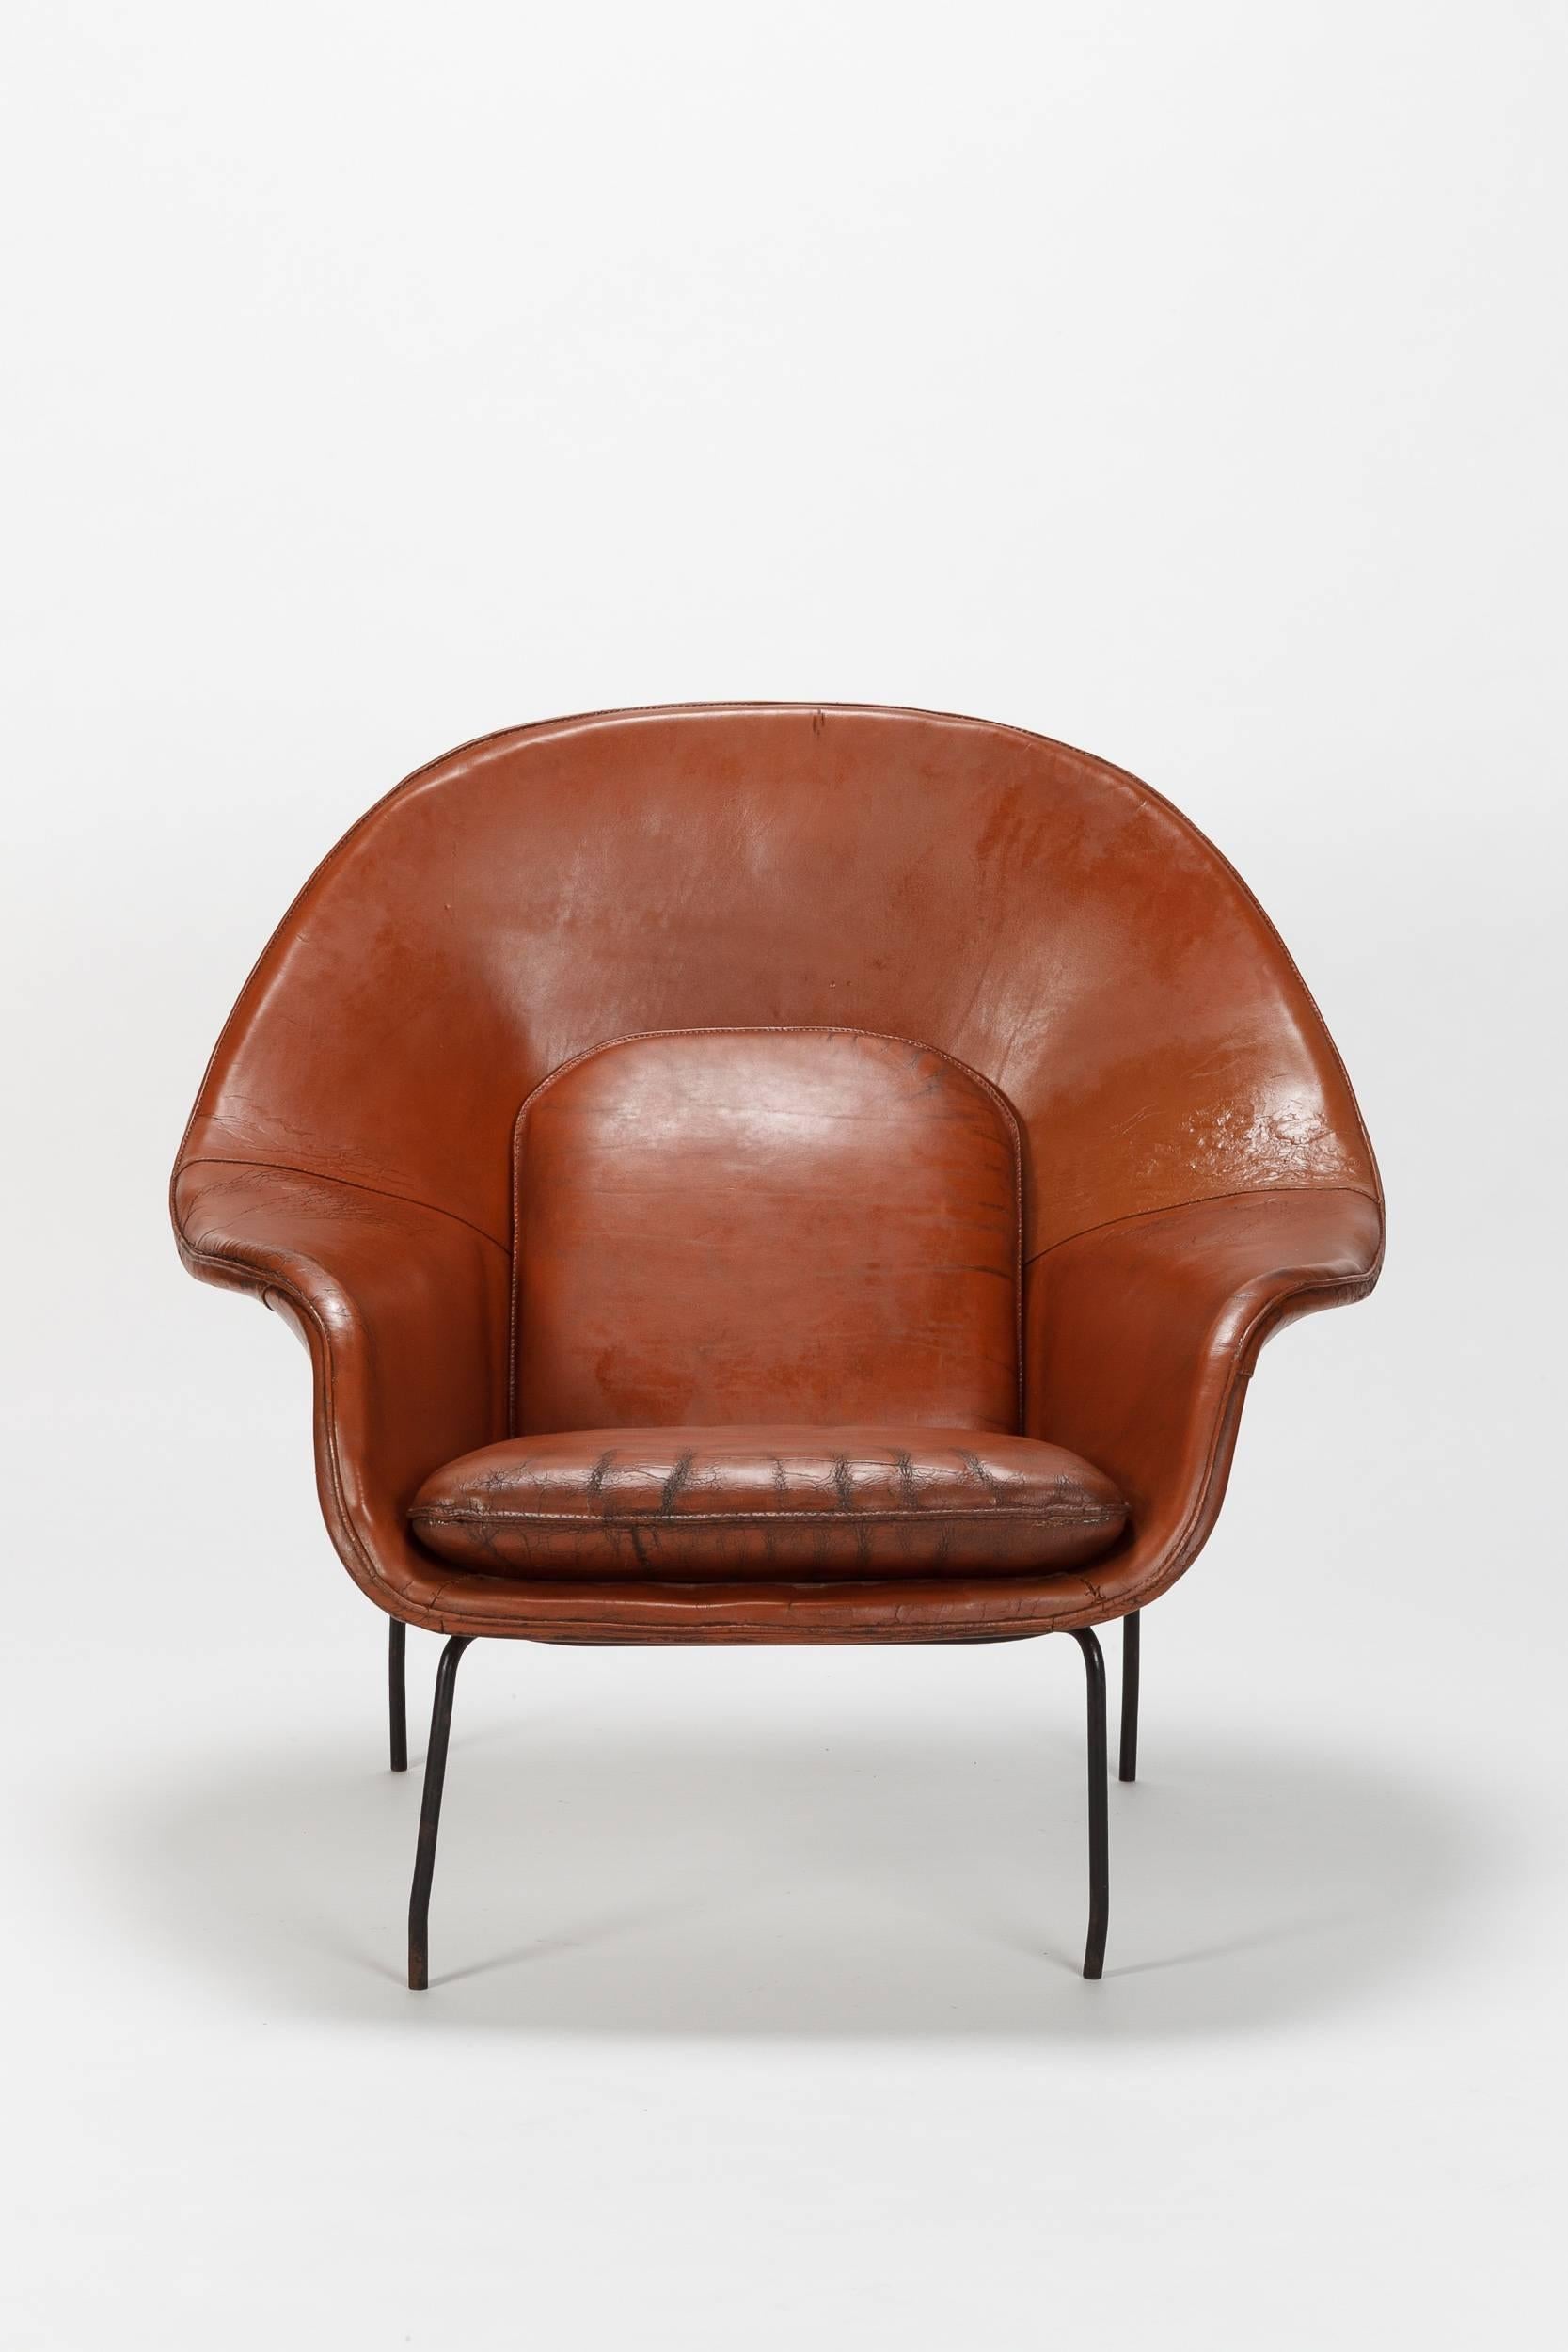 Eero Saarinen Womb chair designed 1948 and manufactured by Knoll. Beautiful brown leather and black metal base. Florence Knoll charged Eero Saarinen to design "a chair that was like a basket full of pillows, something I could really curl up